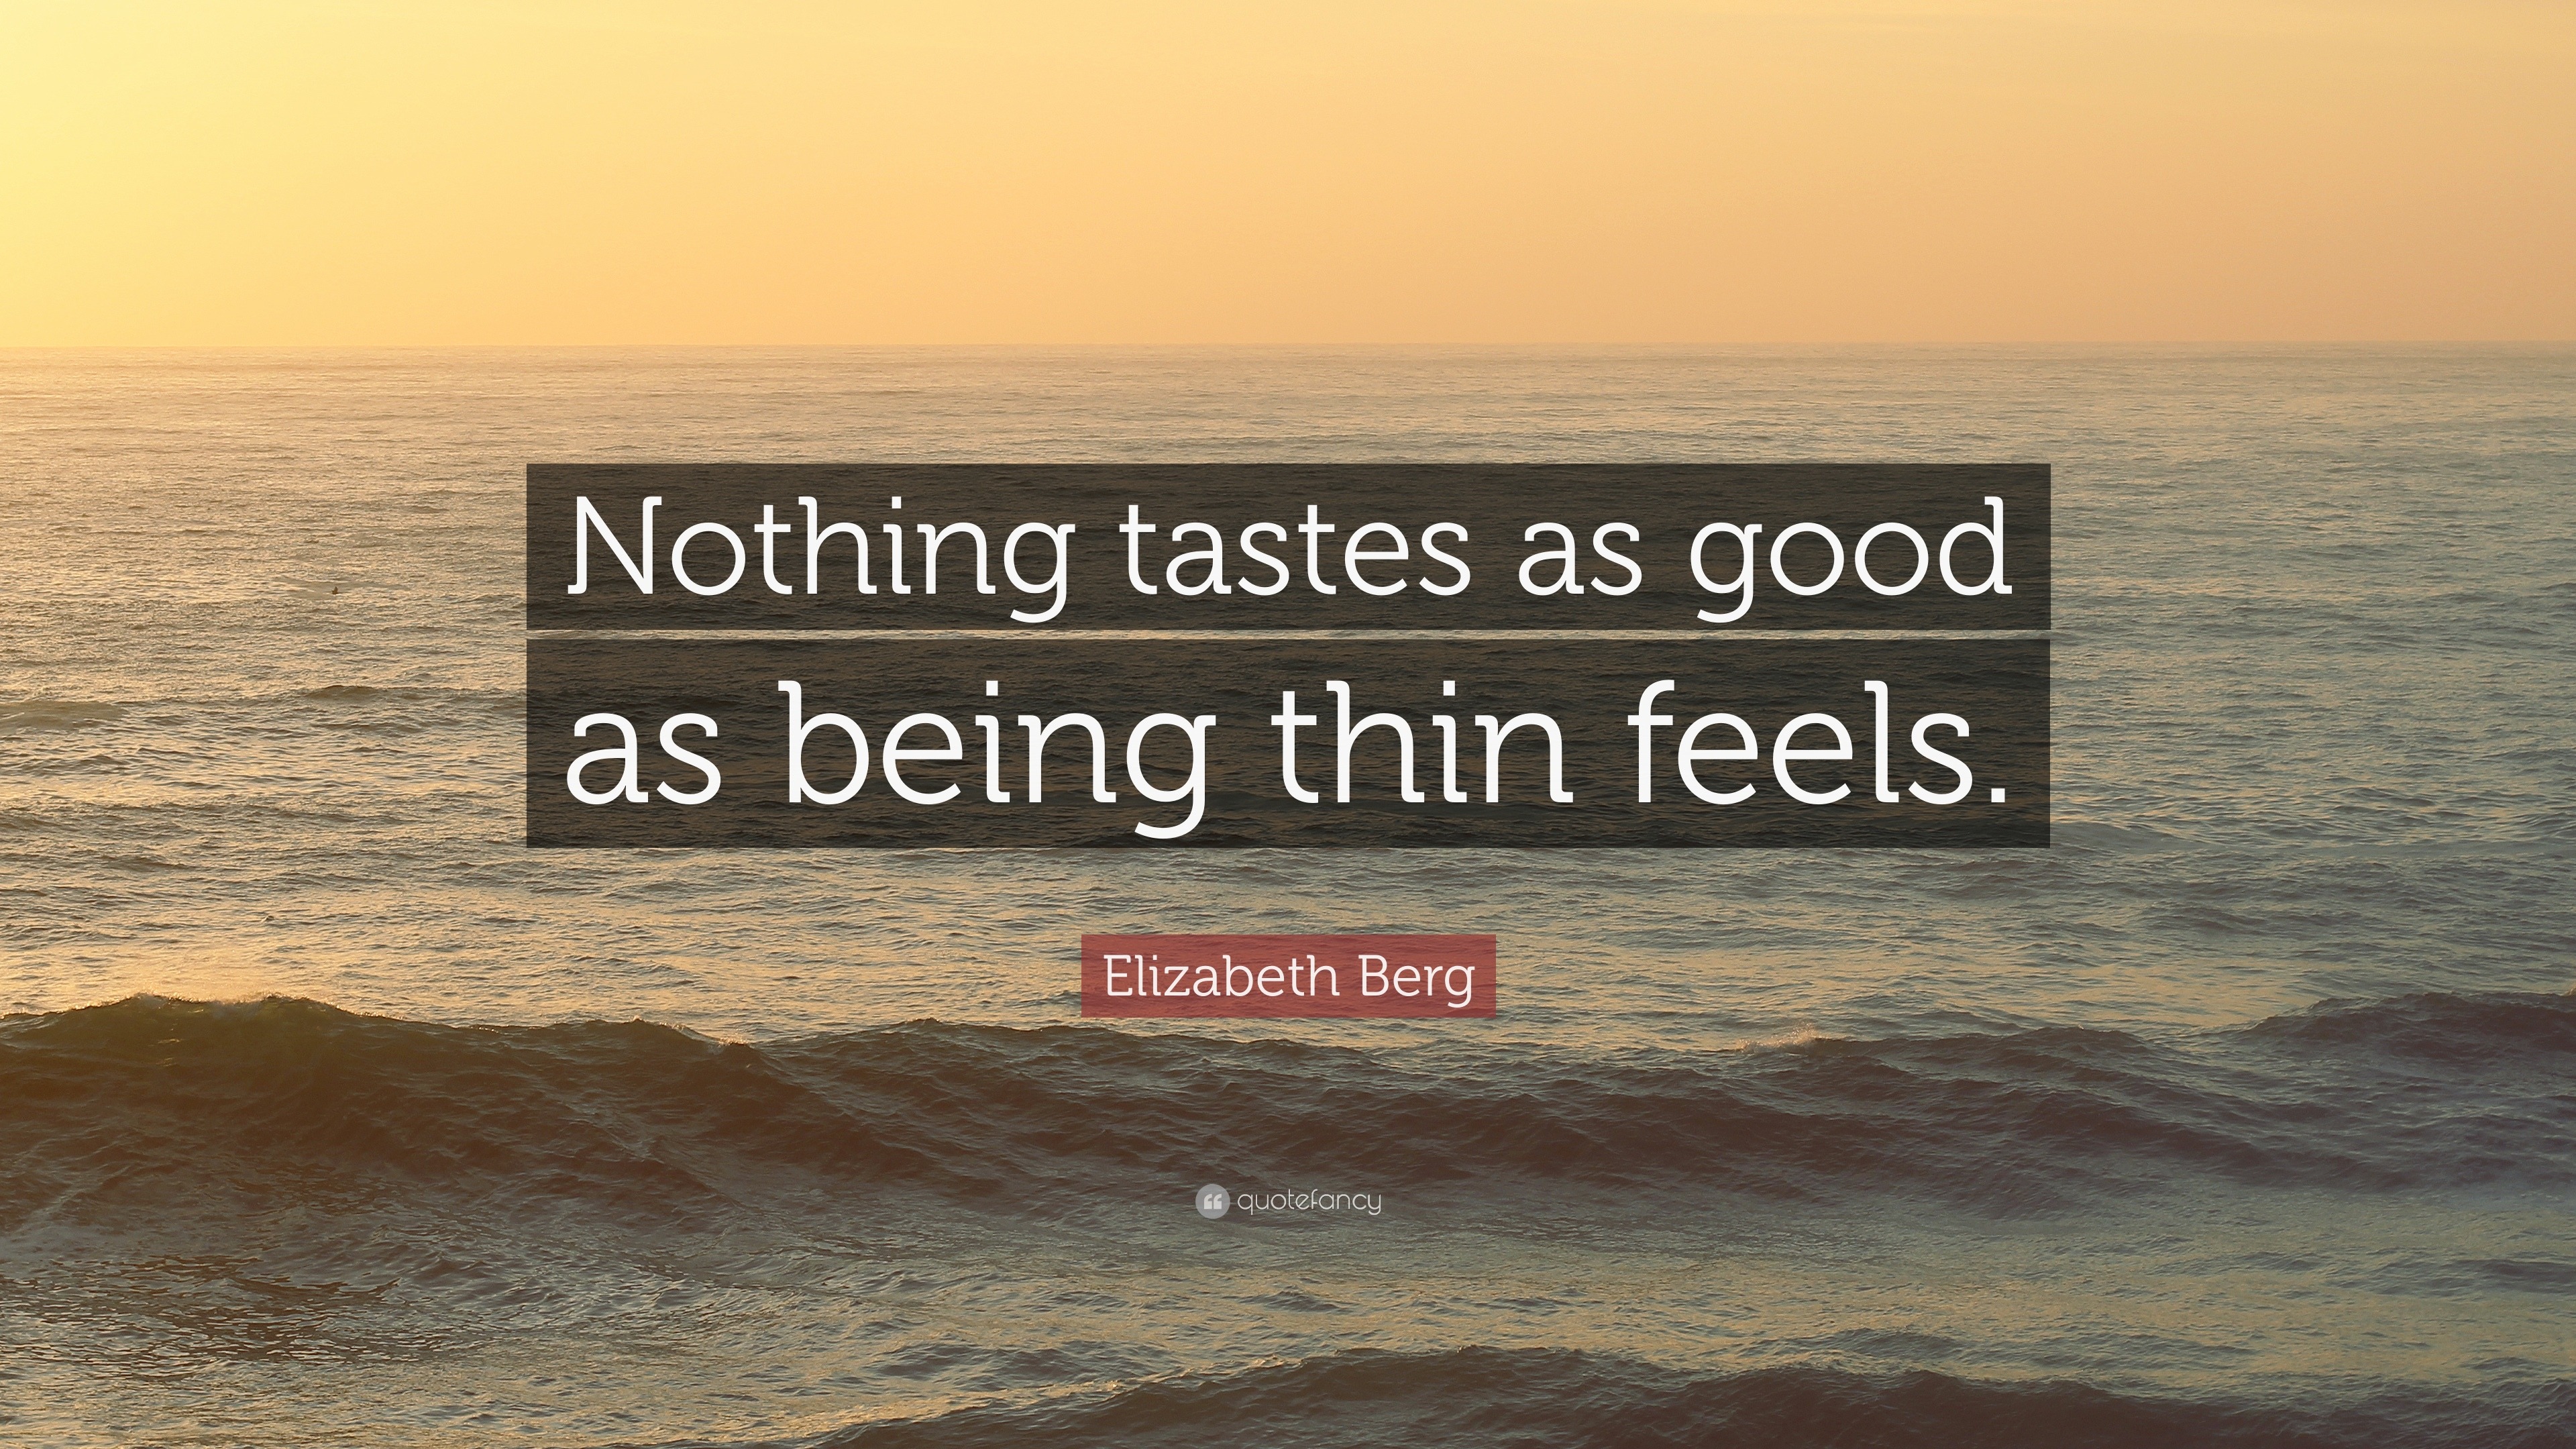 Elizabeth Berg Quote: "Nothing tastes as good as being thin feels." (12 wallpapers) - Quotefancy